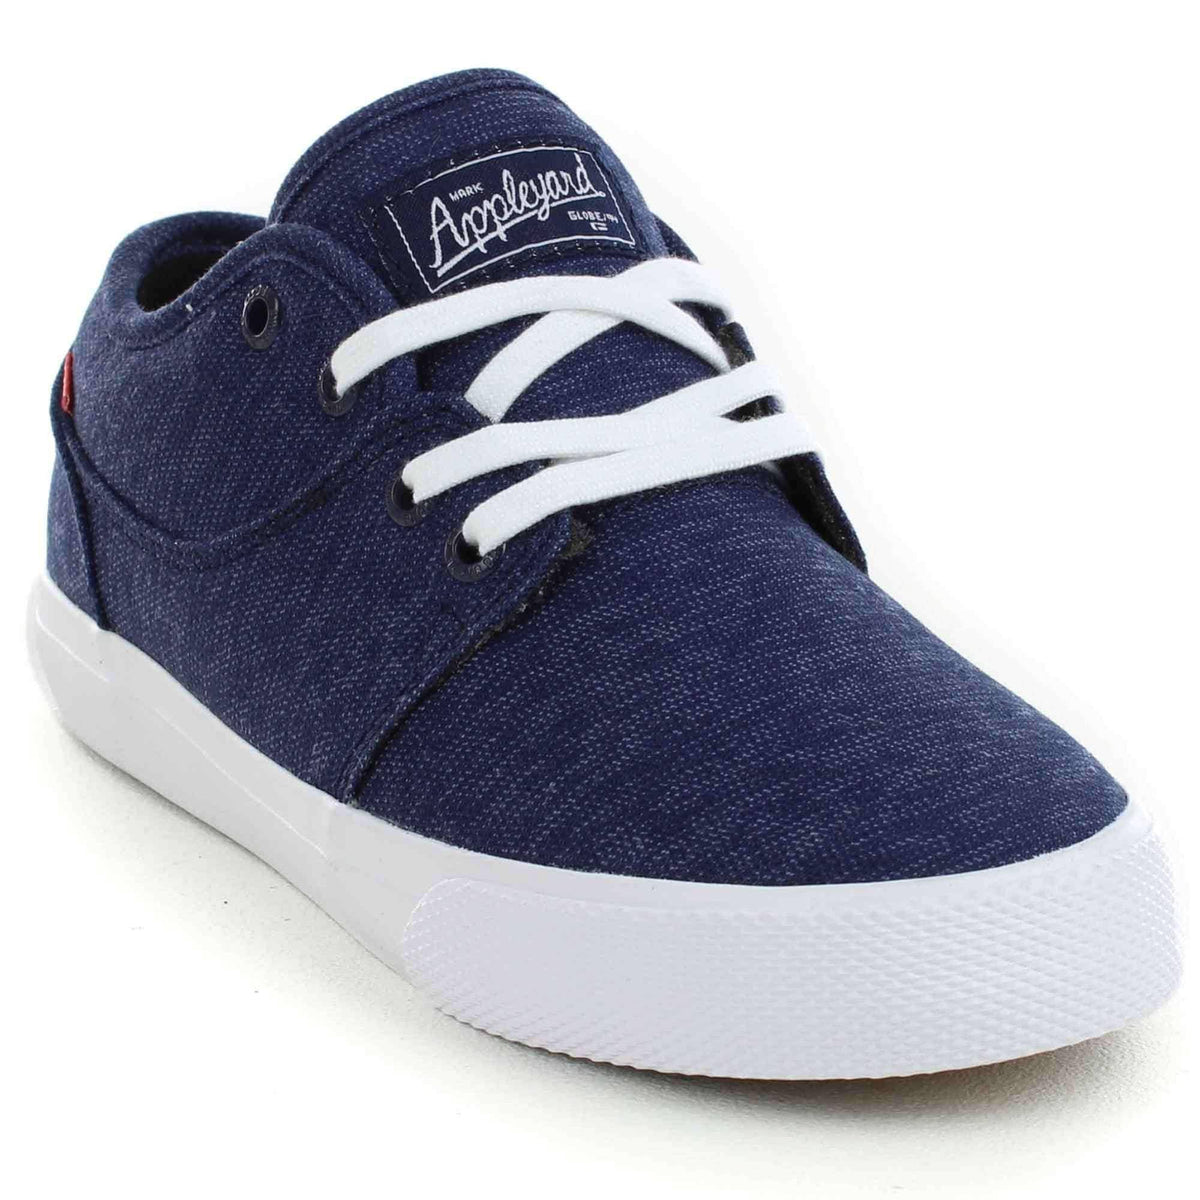 Globe Mahalo Kids Shoes in Moonlight Blue Boys Skate Shoes by Globe